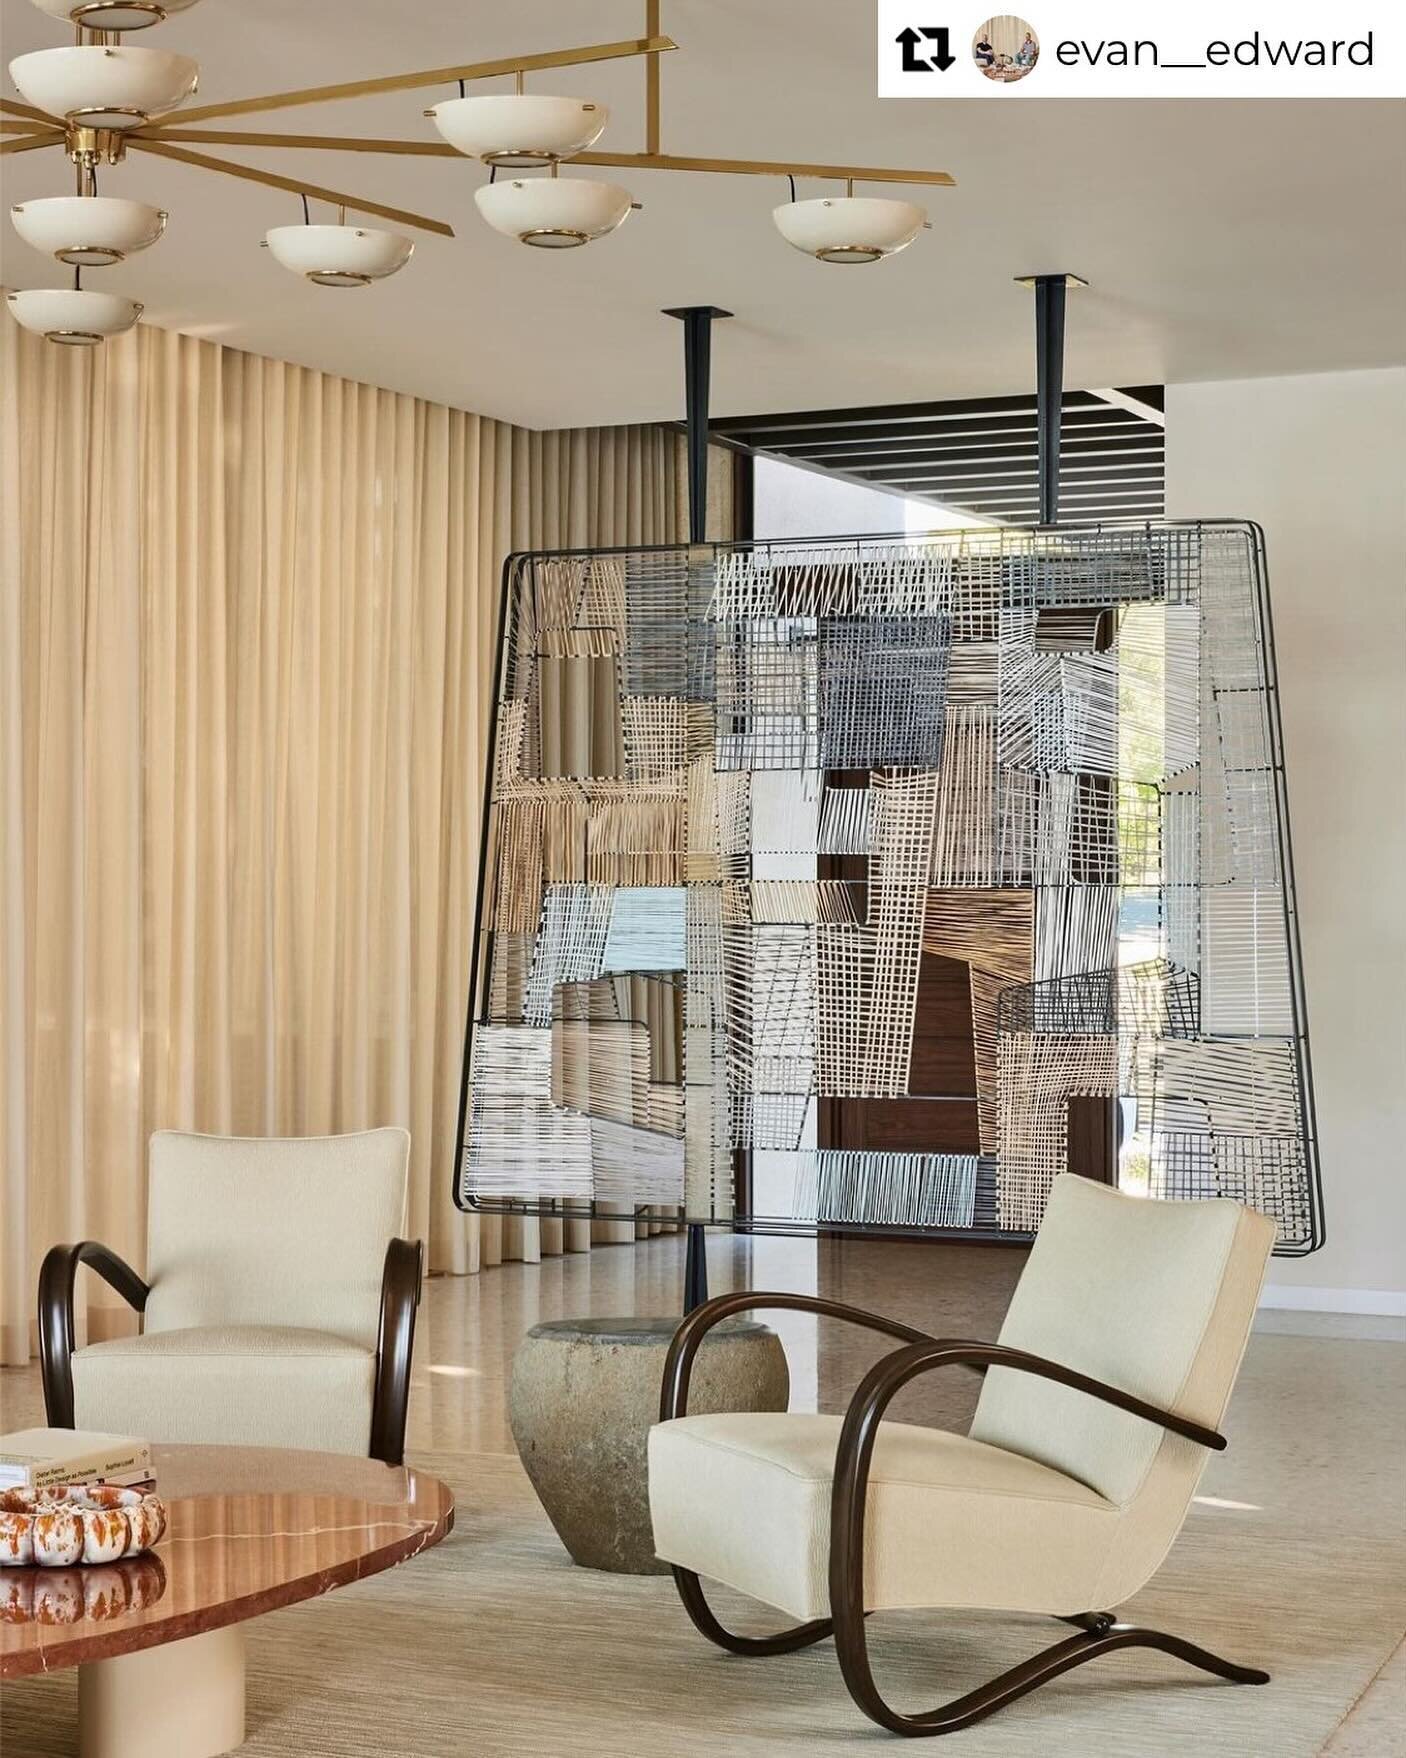 Huge thanks @evan__edward for including us in this exquisite project. 
&bull;
Repost from @evan__edward
&bull;
A raffia screen by @johnpaulphilippe is the perfect backdrop between the foyer and living room at our Miami Beach project. Photo by @nicole